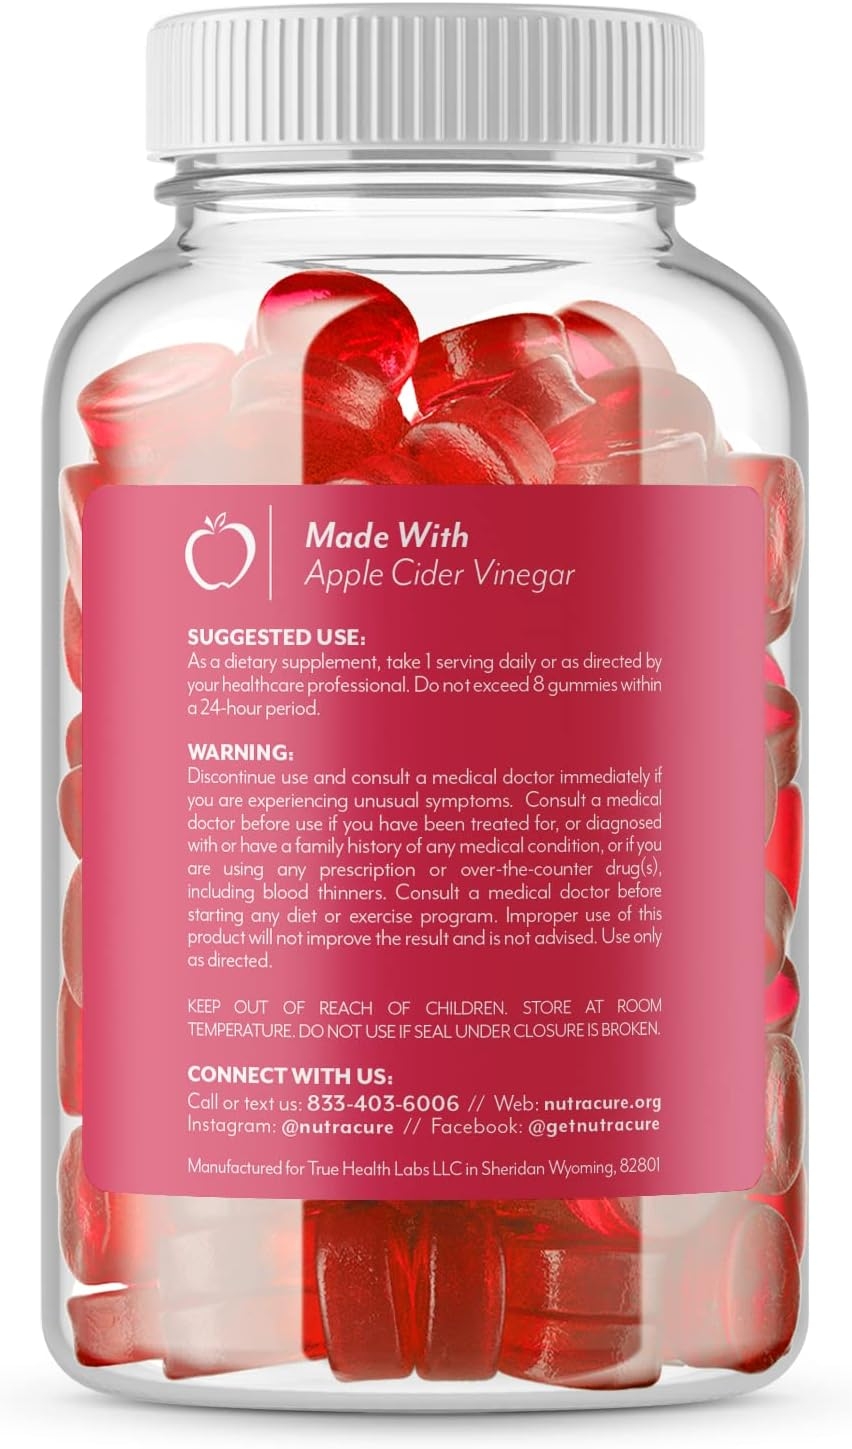 Apple Cider Vinegar Gummies For Weight Loss. (2-Pack) Nutracure Apple Cider Vinegar Gummies for Weight Loss, Detox, & Cleanse - Non-GMO ACV Gummies with The Mother